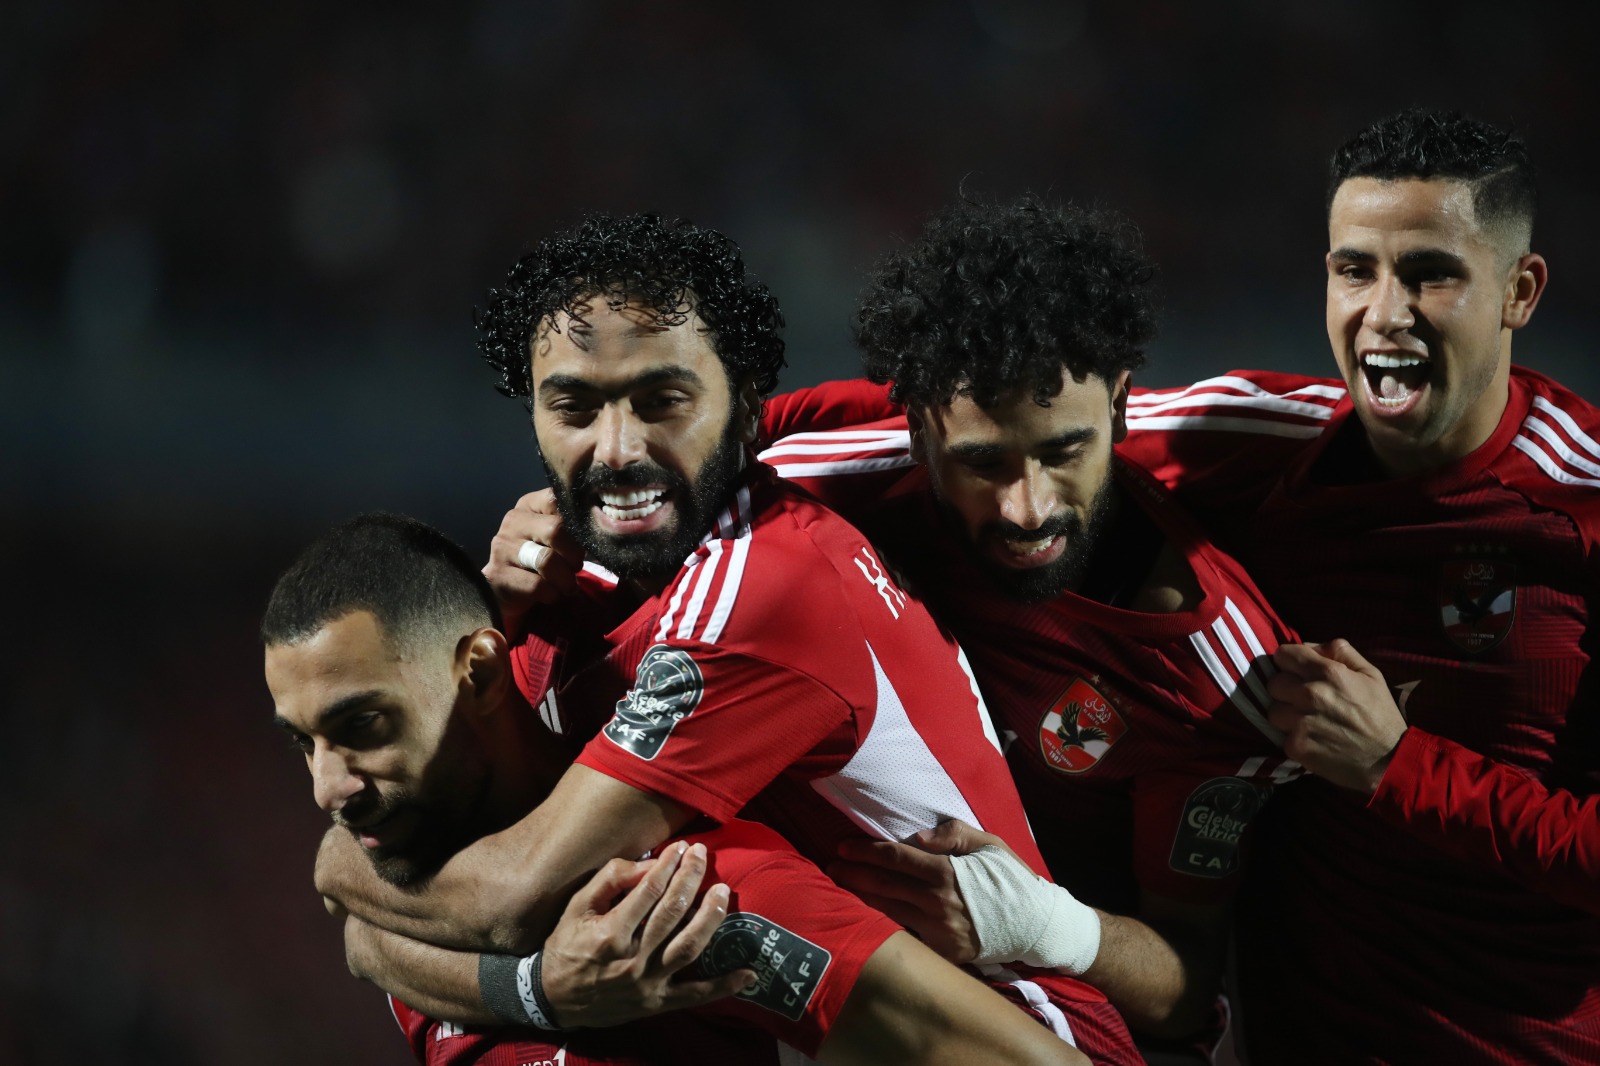 Ahly crowned champions of Africa for record-extending 12th title